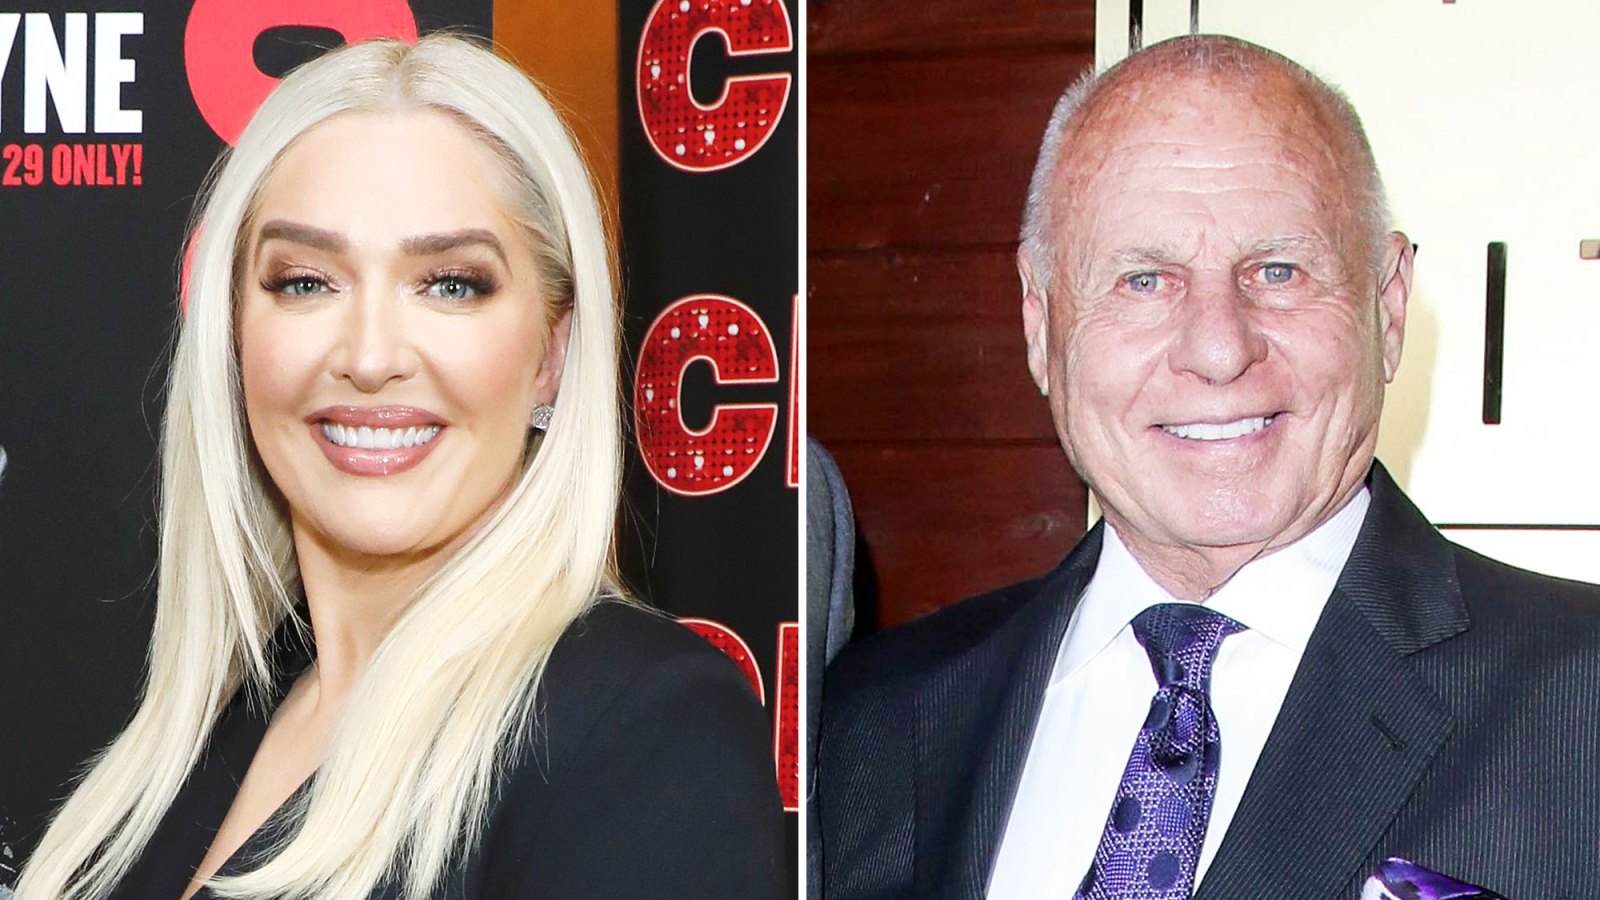 Erika Jayne Understands the Interest in Her Sex Life With Husband Tom Girard